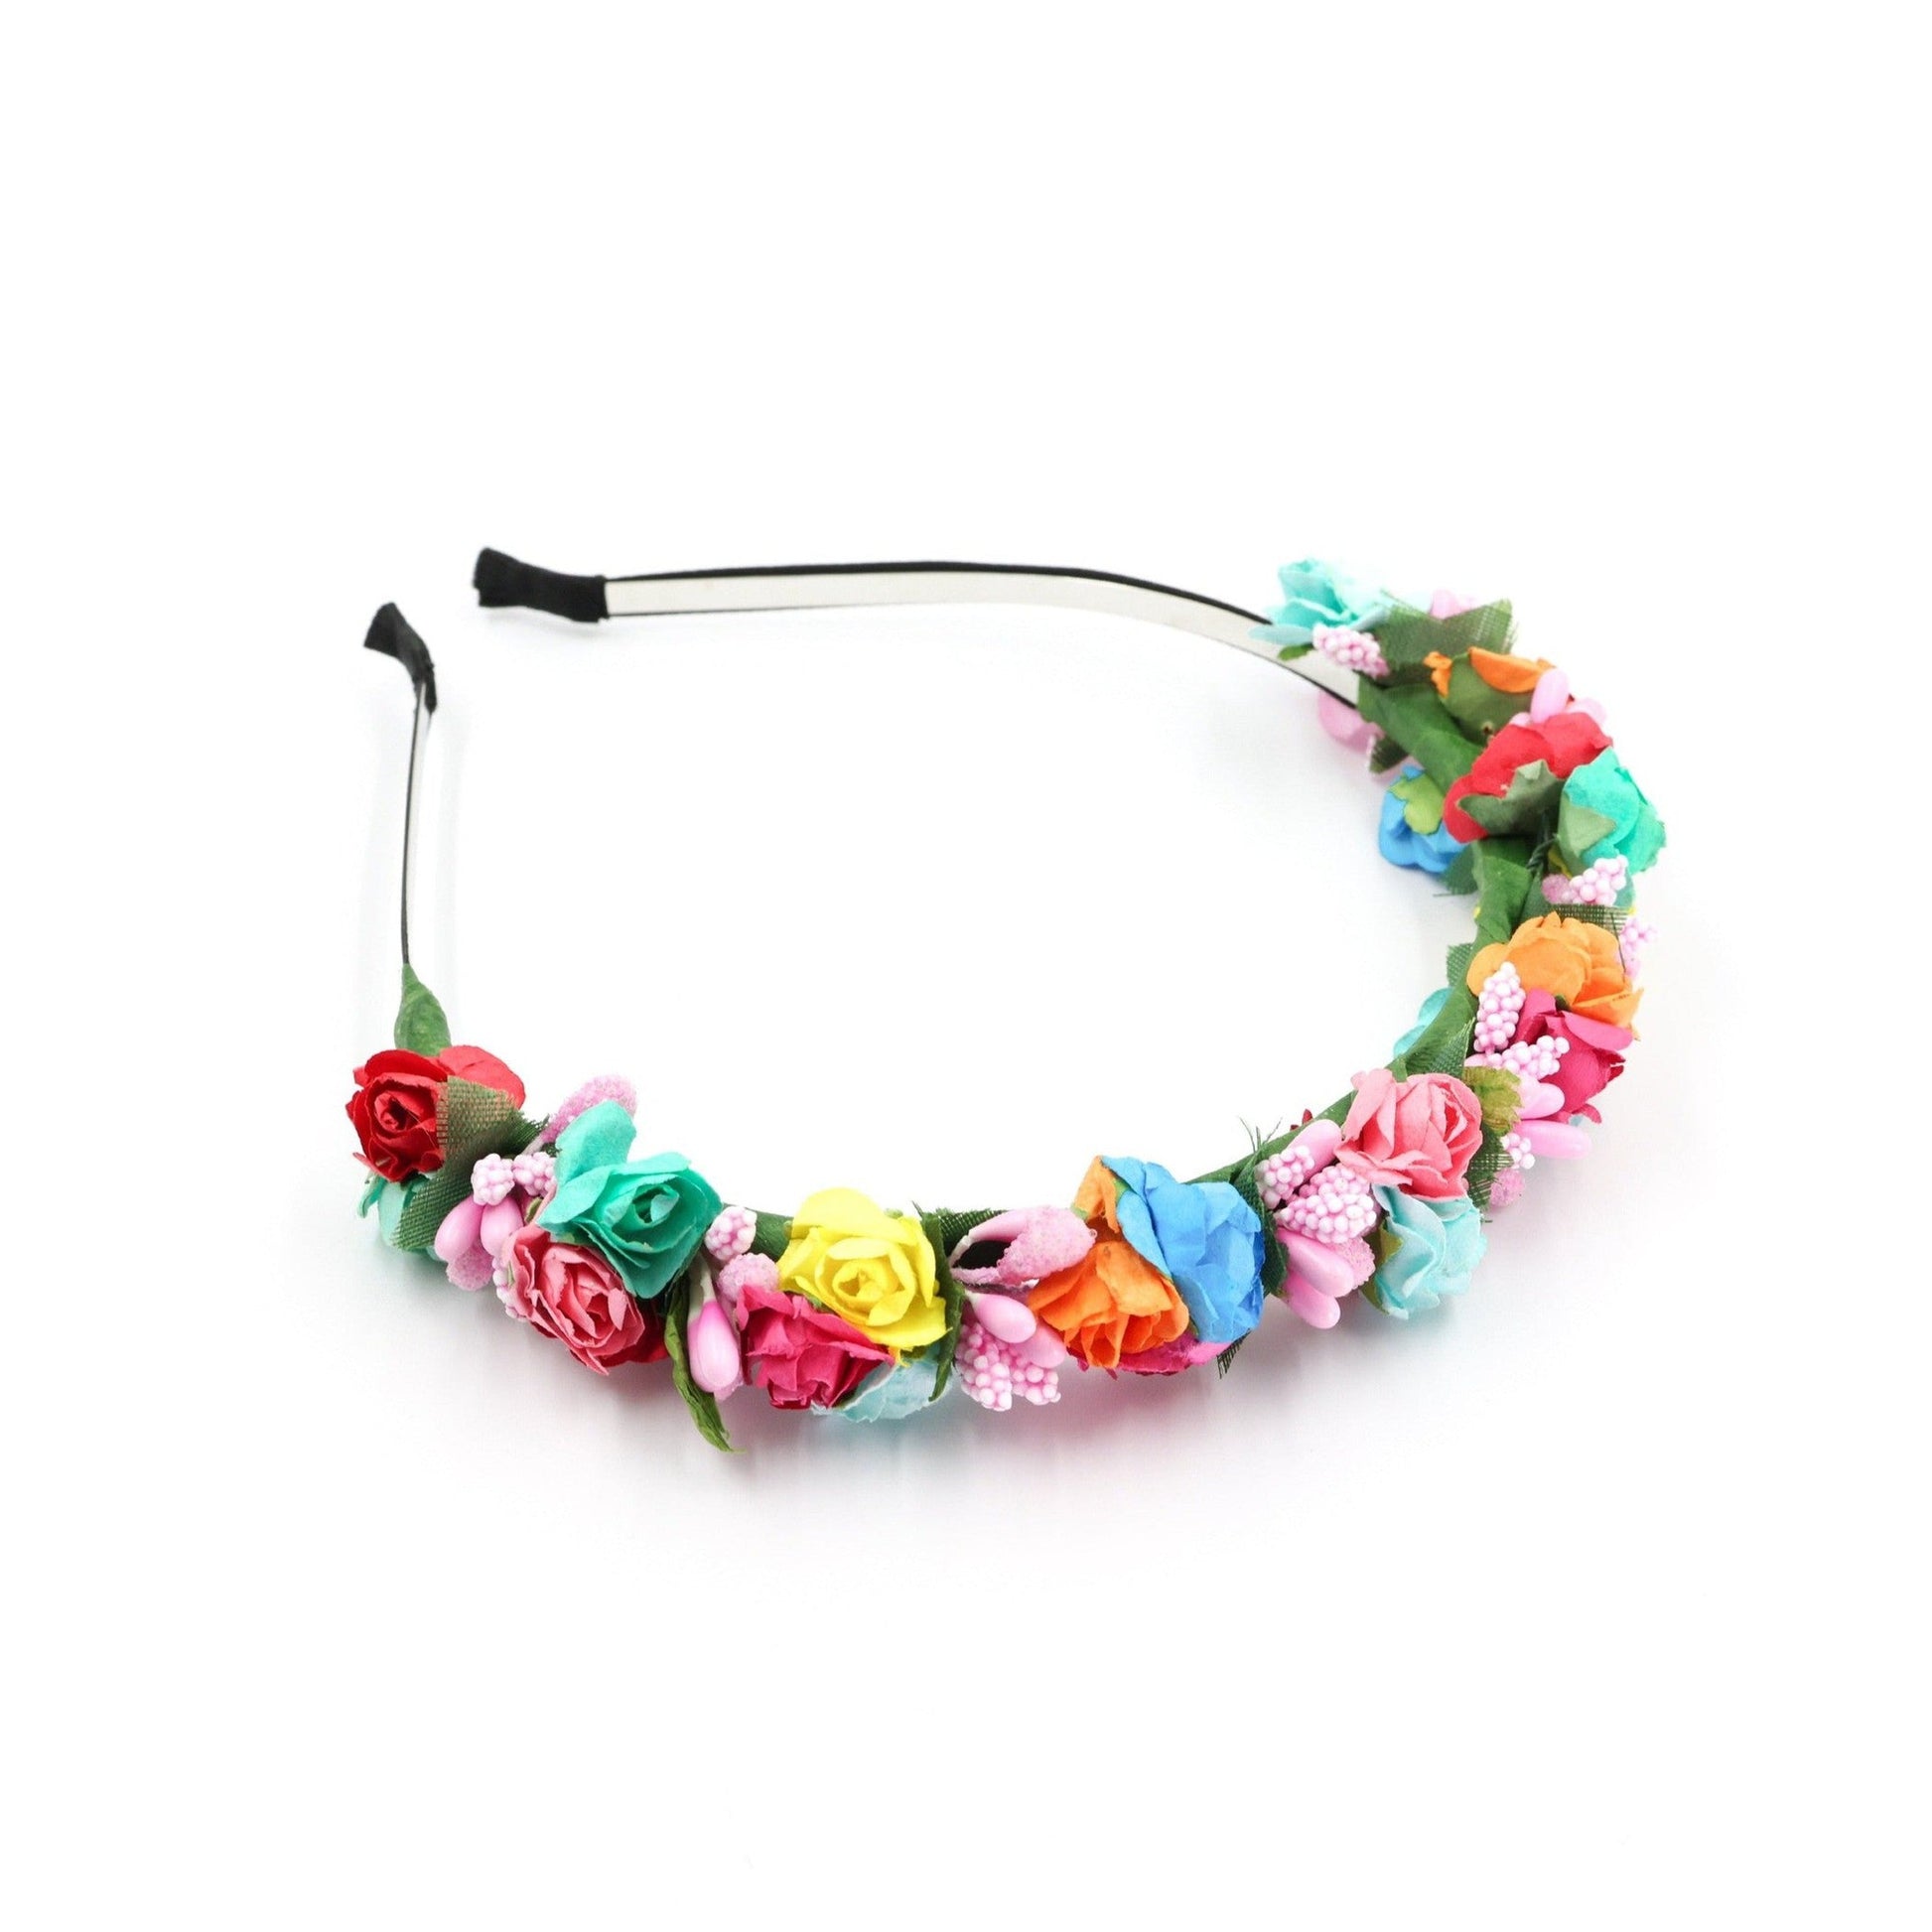 Blooms of Happiness Flower Crown in Vivid Florals – The Bullish Store